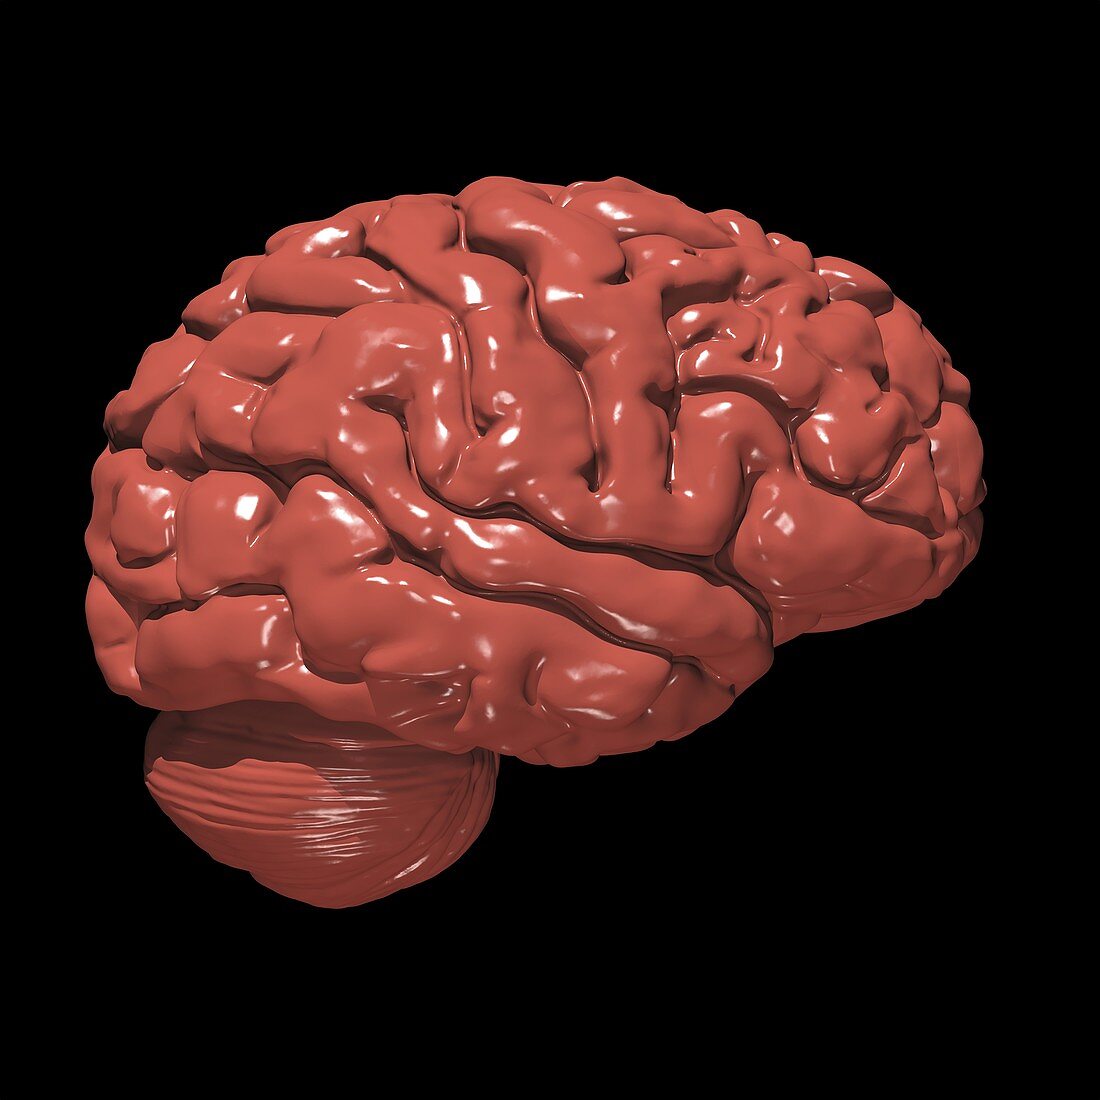 Brain made of chocolate,conceptual image